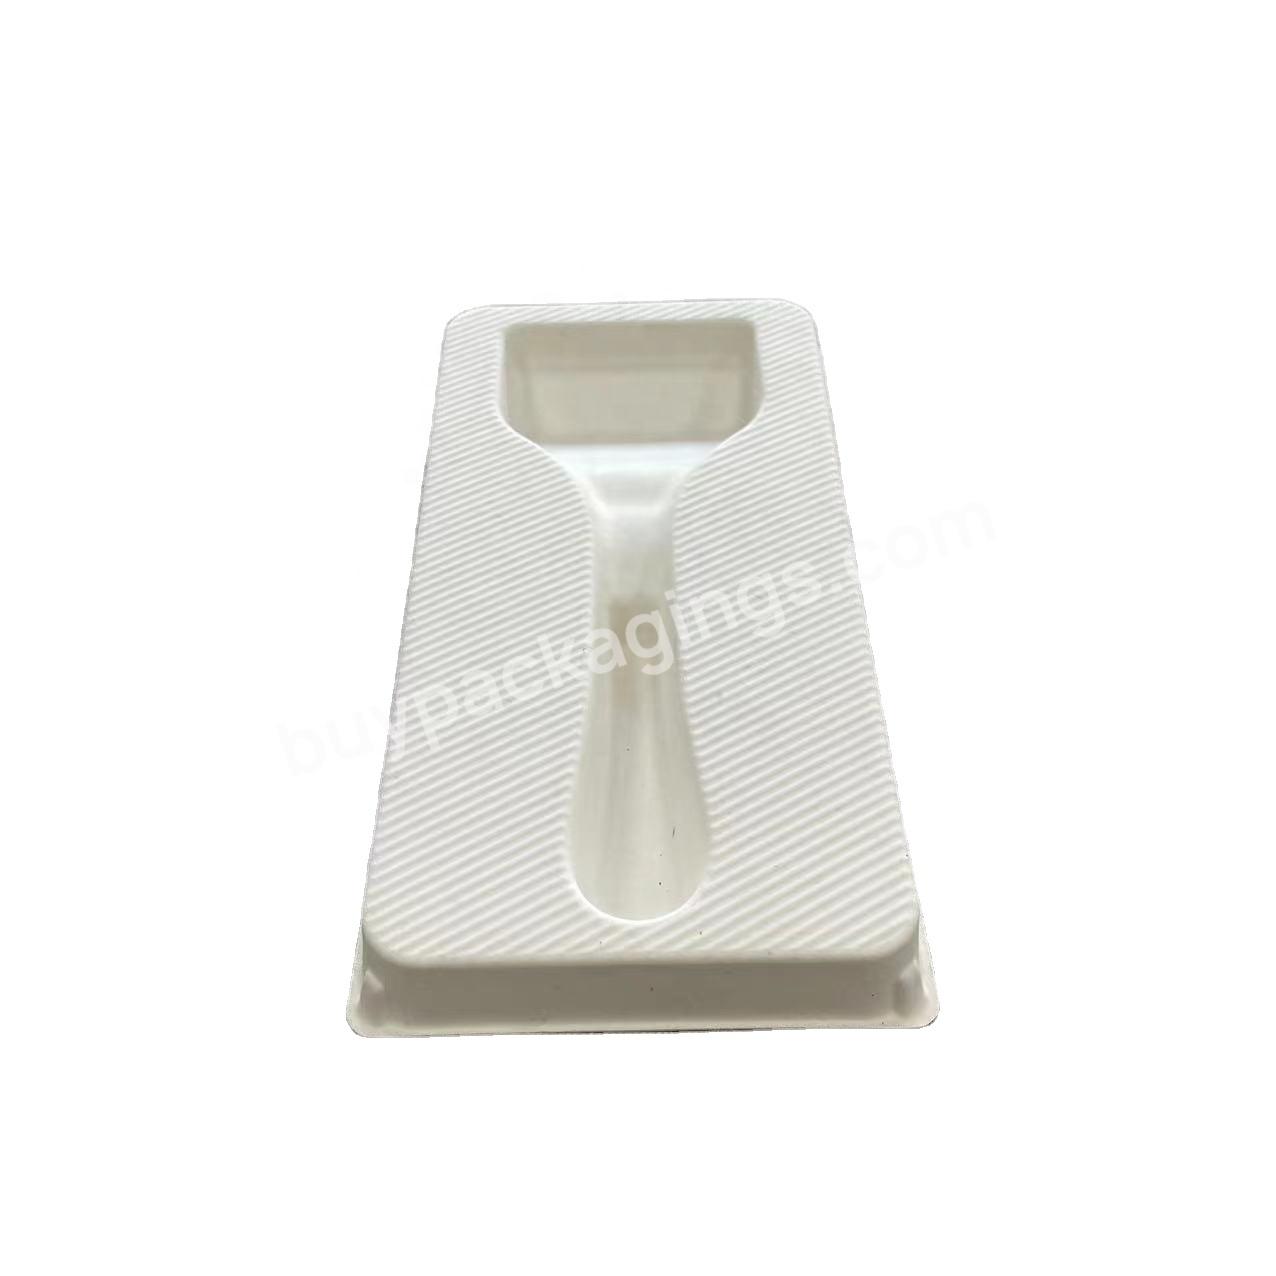 Hot Sell Wholesale Recycle Biodegradable Bamboo Molded Paper Pulp Serving Packaging Inner Handles Rectangle Insert Tray - Buy Hot Sell Biodegradable Paper Pulp Packaging Tray Molded Paper Pulp,Wholesale Recycle Paper Pulp Tray,Serving Tray New Design